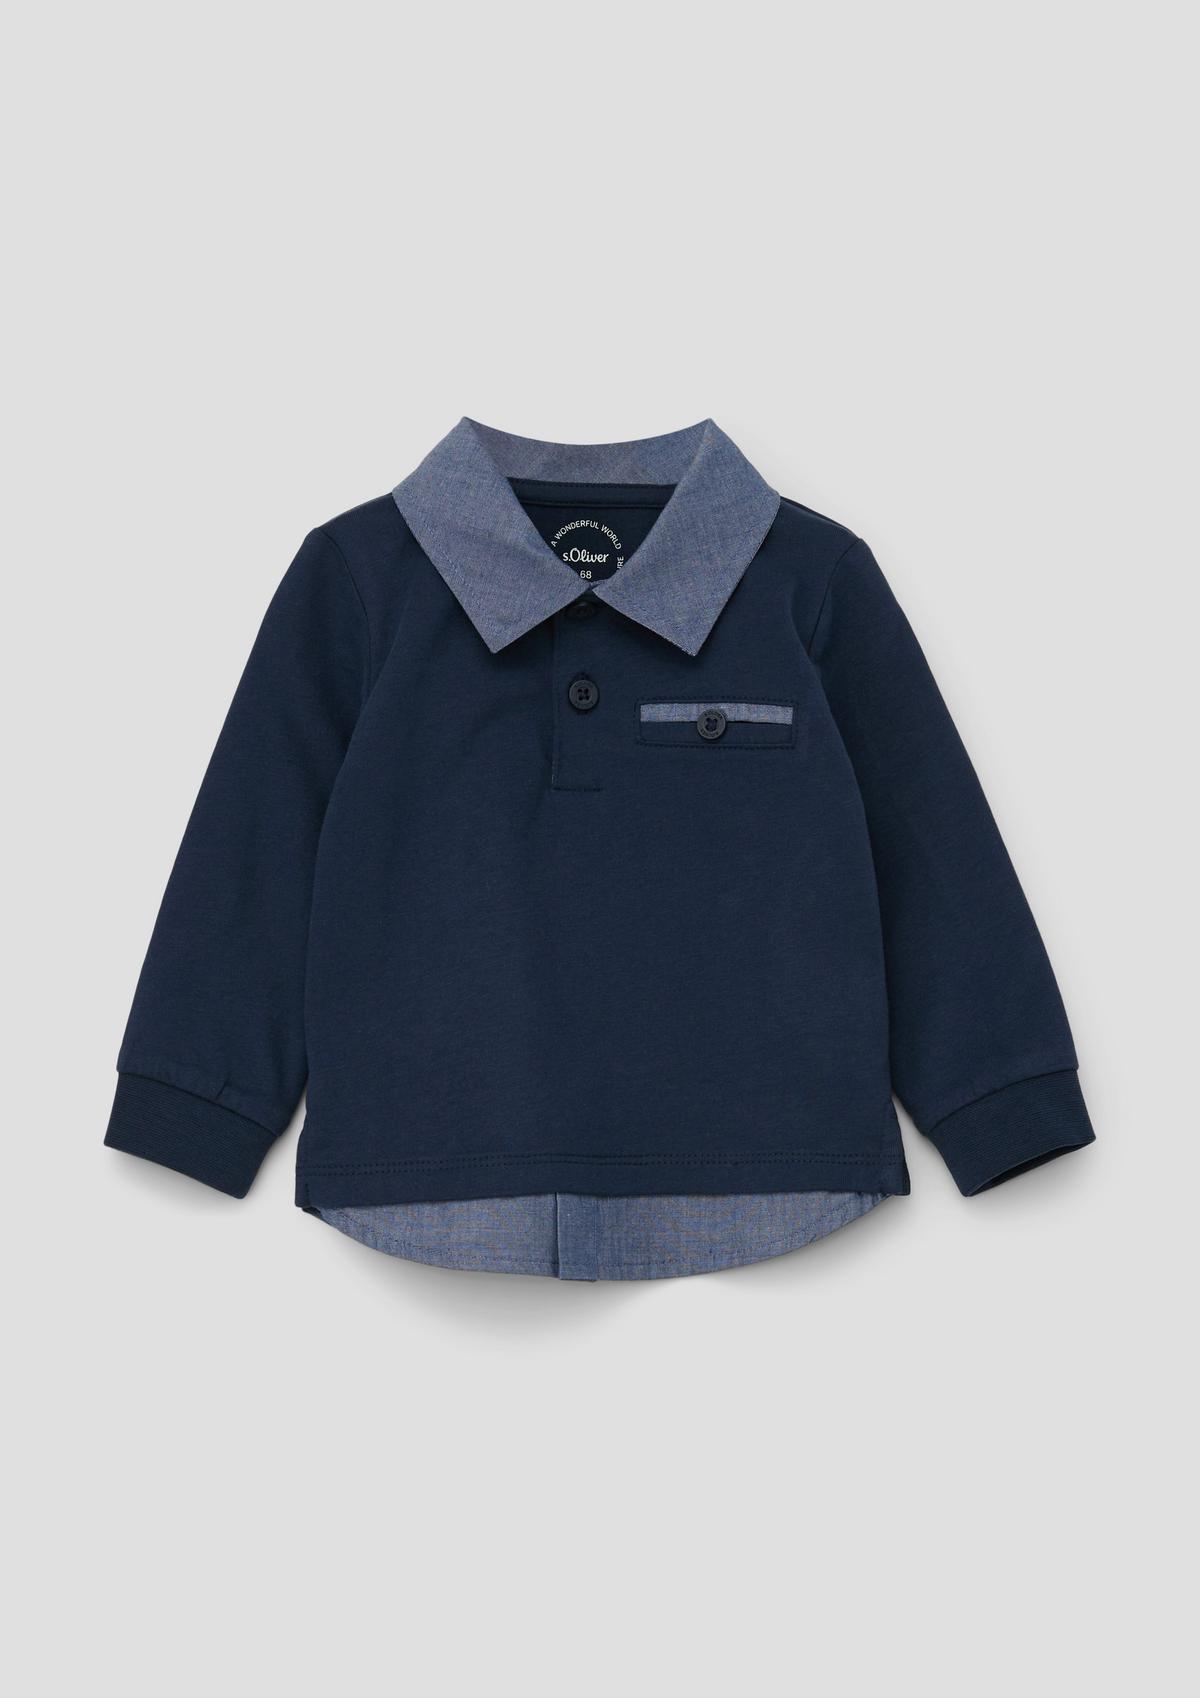 Polo shirt in a layered look - navy